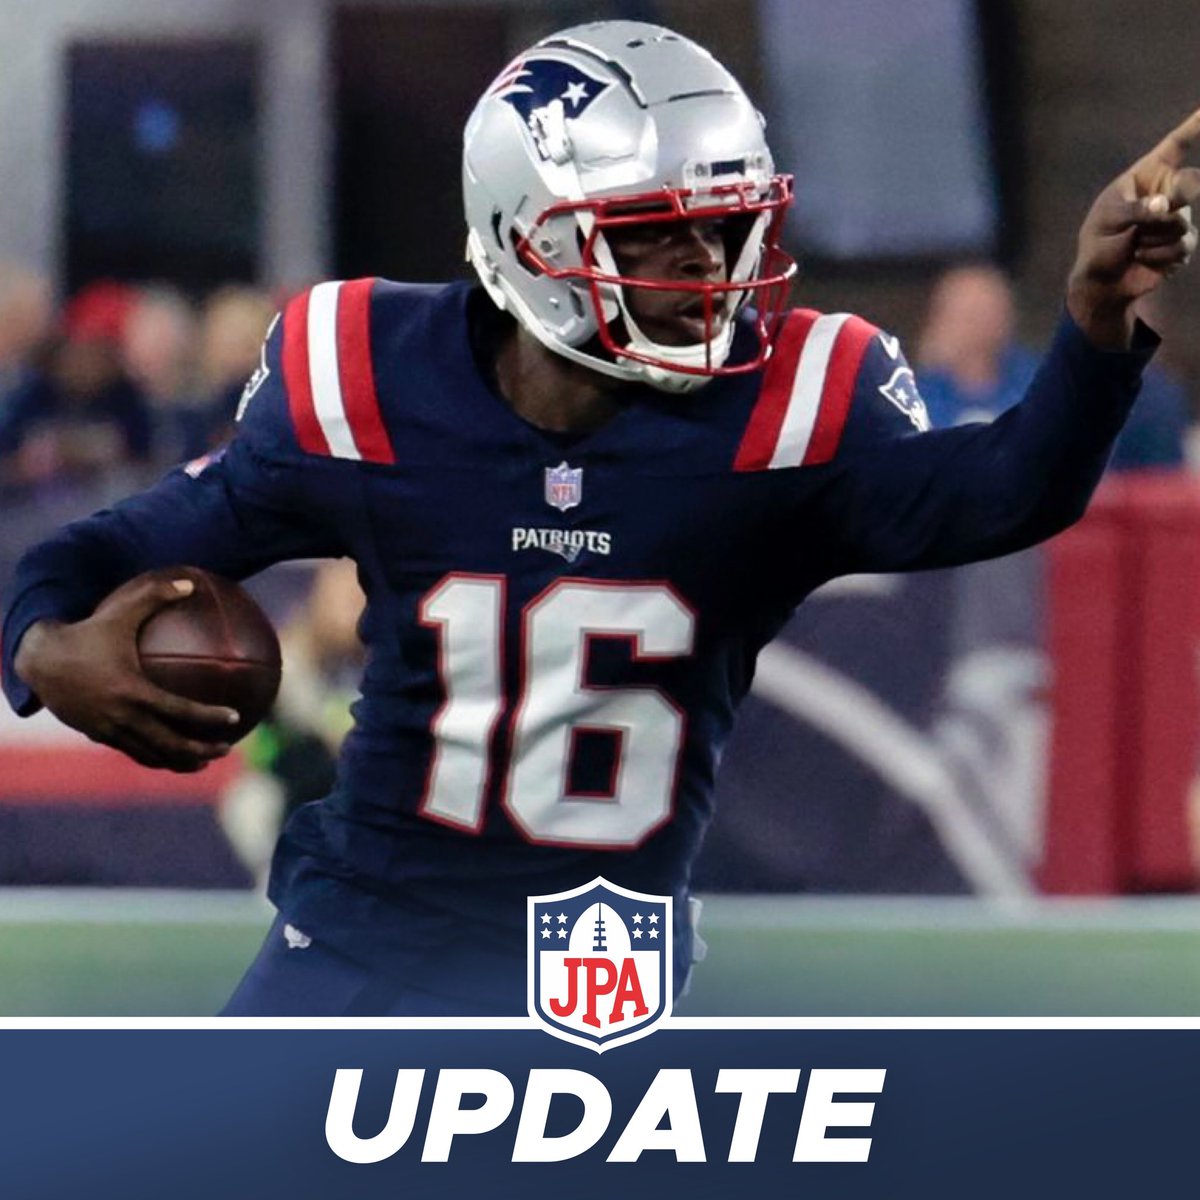 Wow: Not only are the #Patriots elevating Malik Cunningham from the practice squad to the 53 man roster, but they are signing him to a THREE year deal, per @RapSheet That’s pretty impressive, from PS right to a 3 year contract.